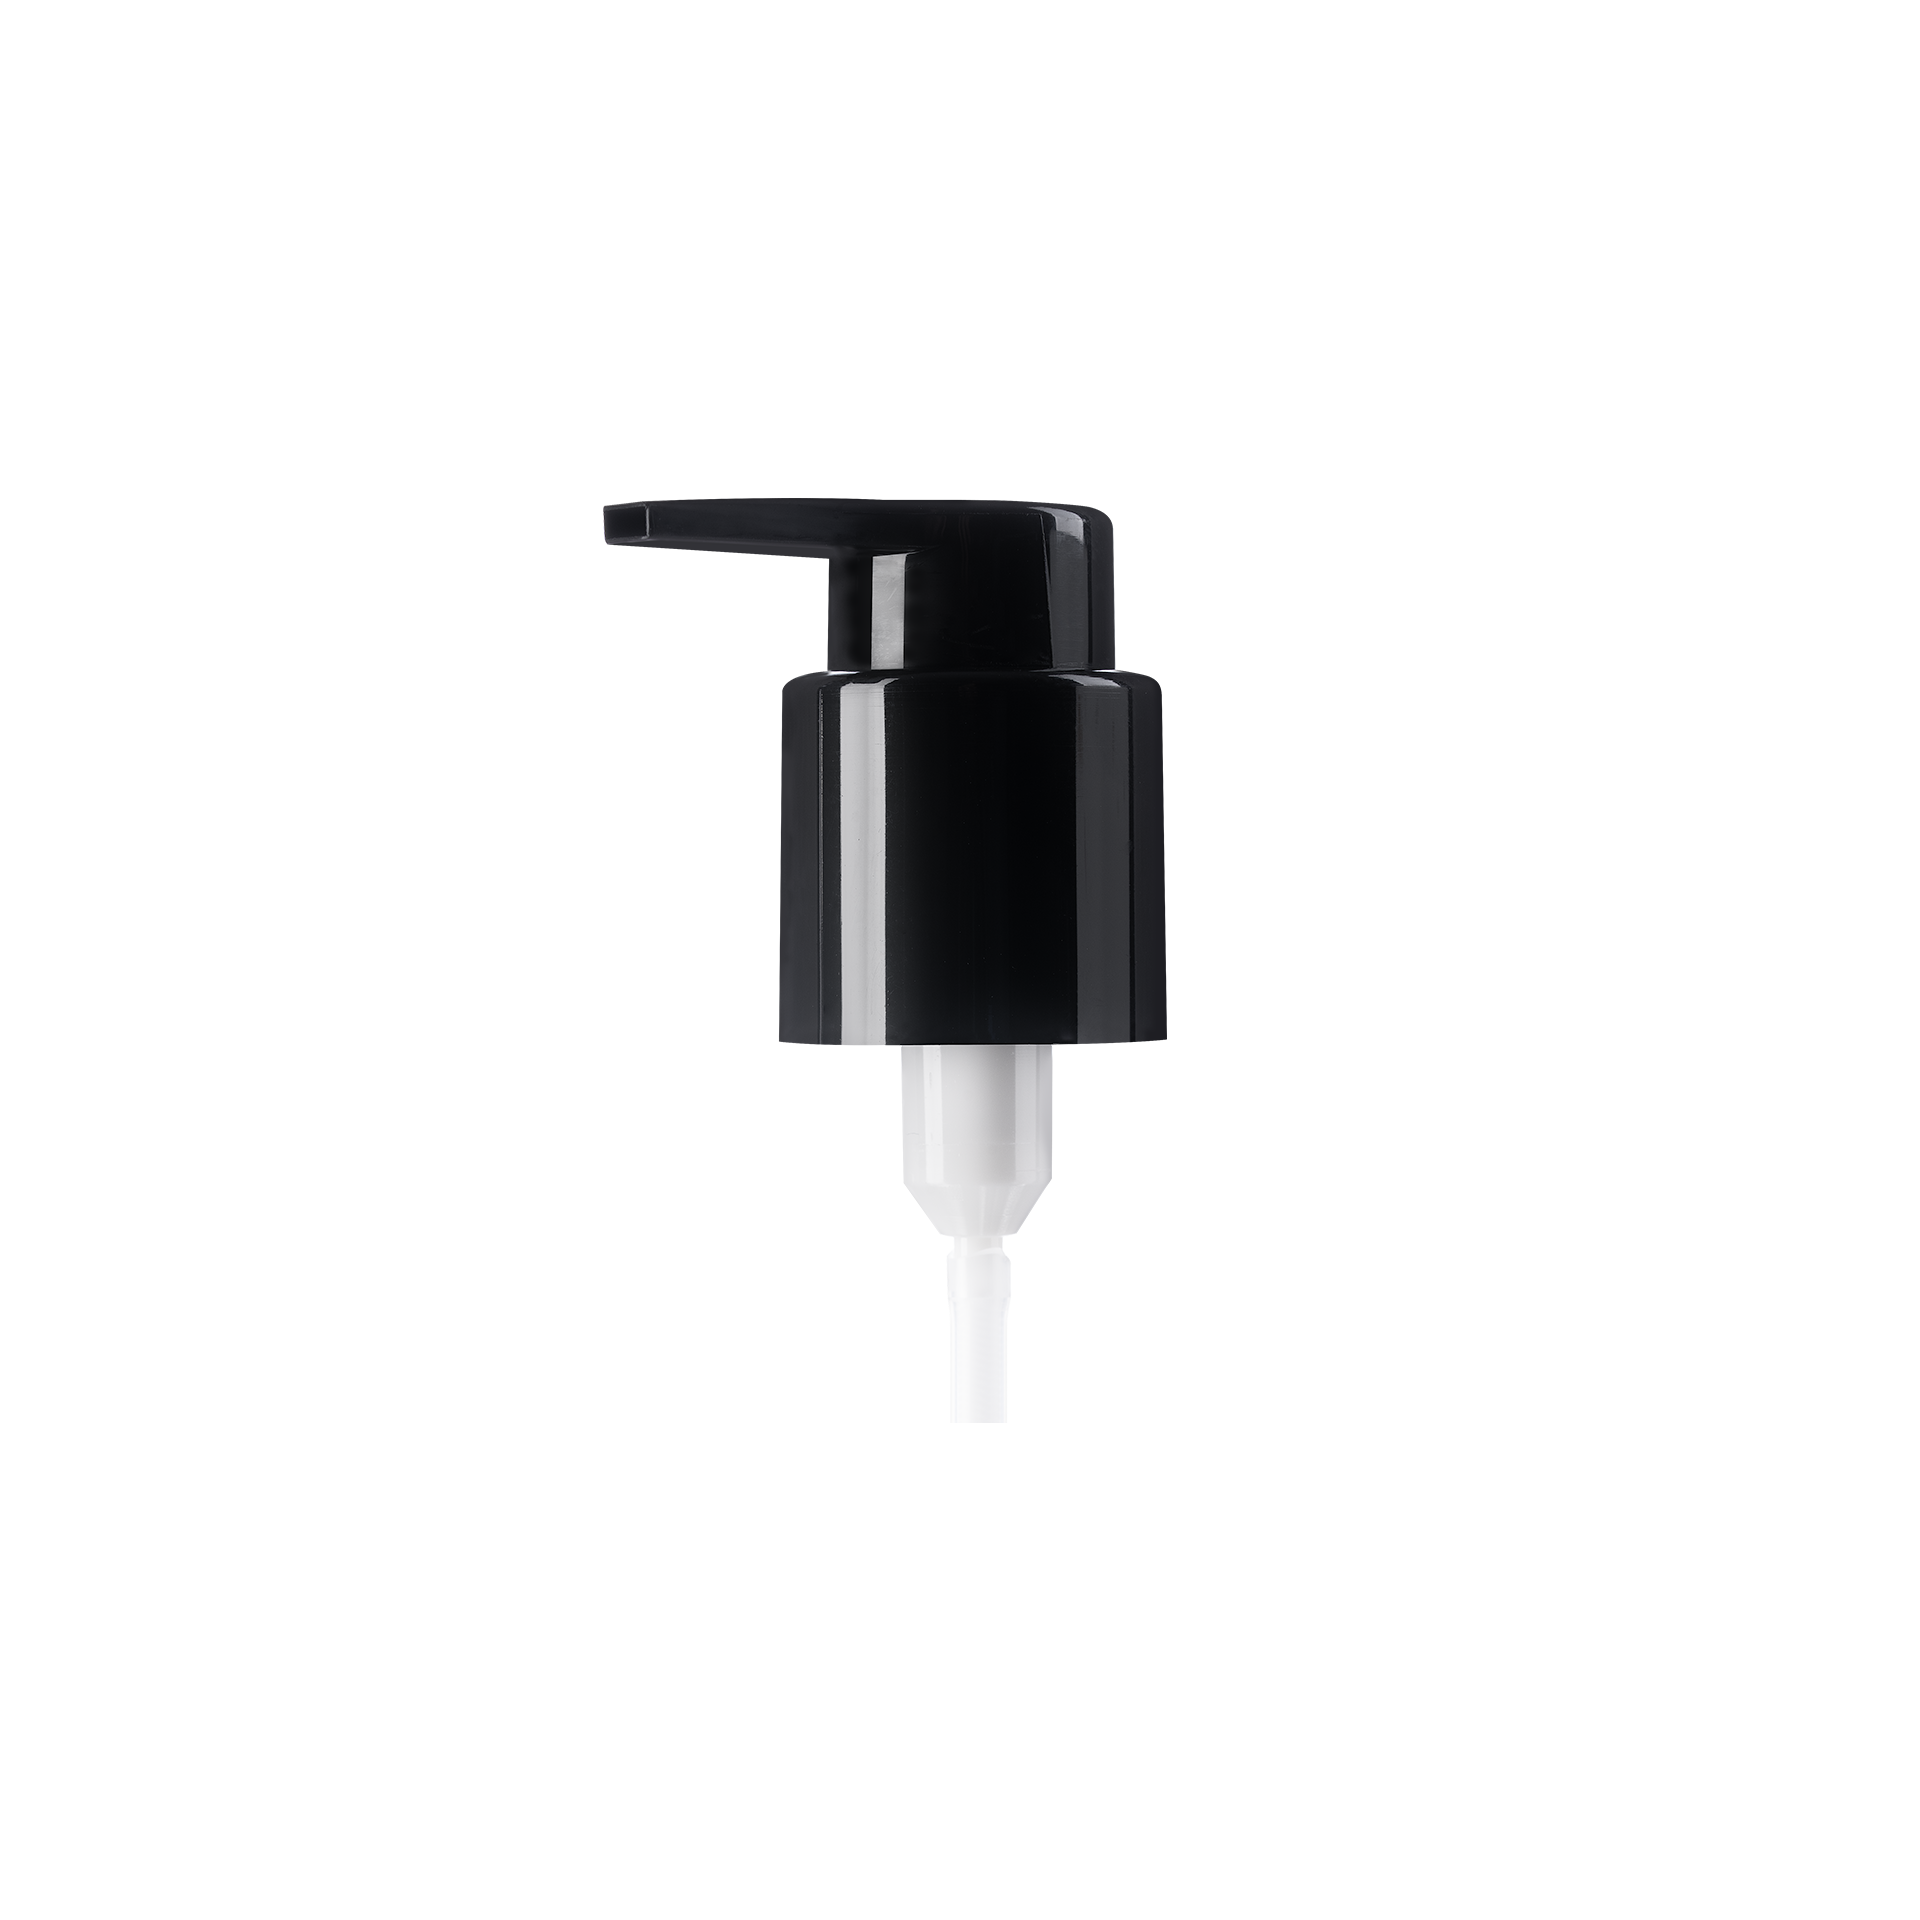 Lotion pump Extended Nozzle 24/410, PP, black, smooth, dose 0.50ml, security clip (Linden LW 150)